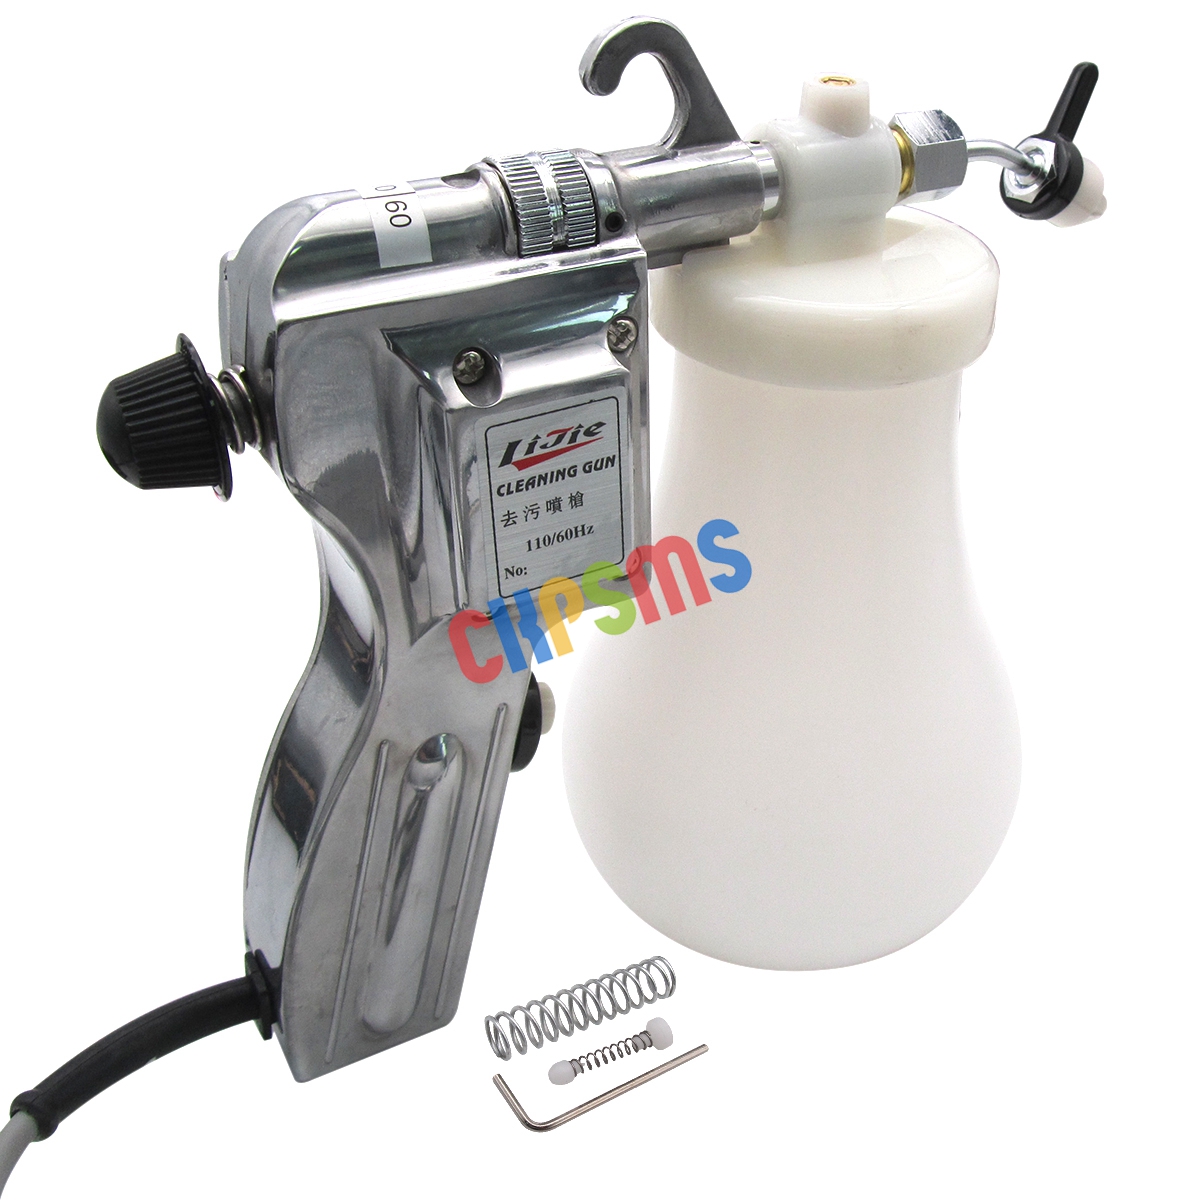 New Textile Spot Cleaning Gun fit For Screen Printers 110 Volt #KP-170A 110V